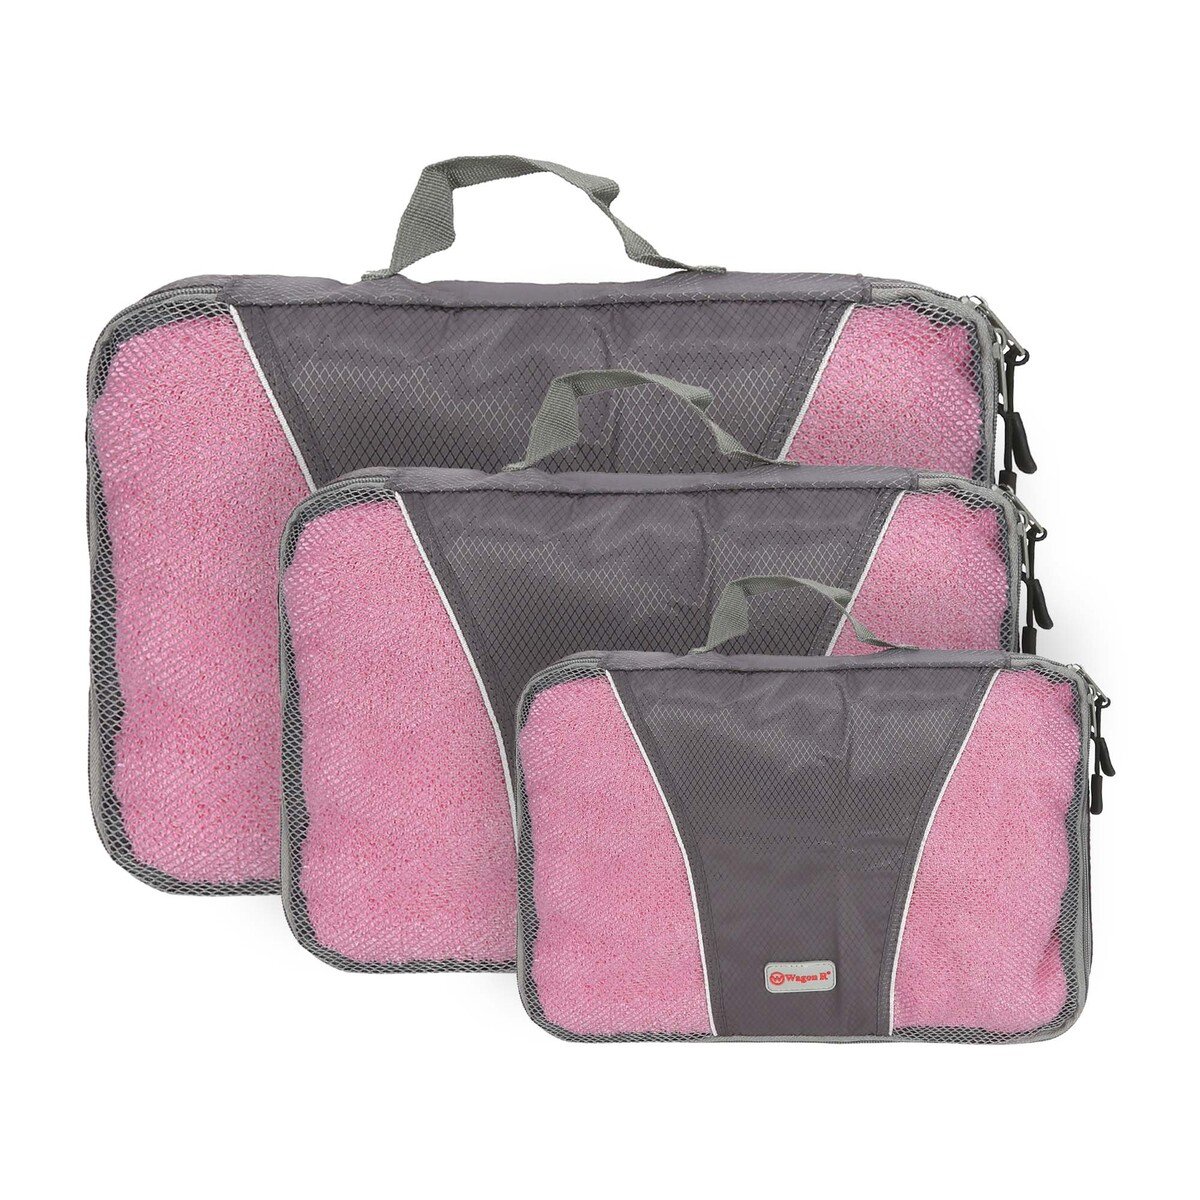 Wagon R Travel Packing Pouch BS-101 Assorted